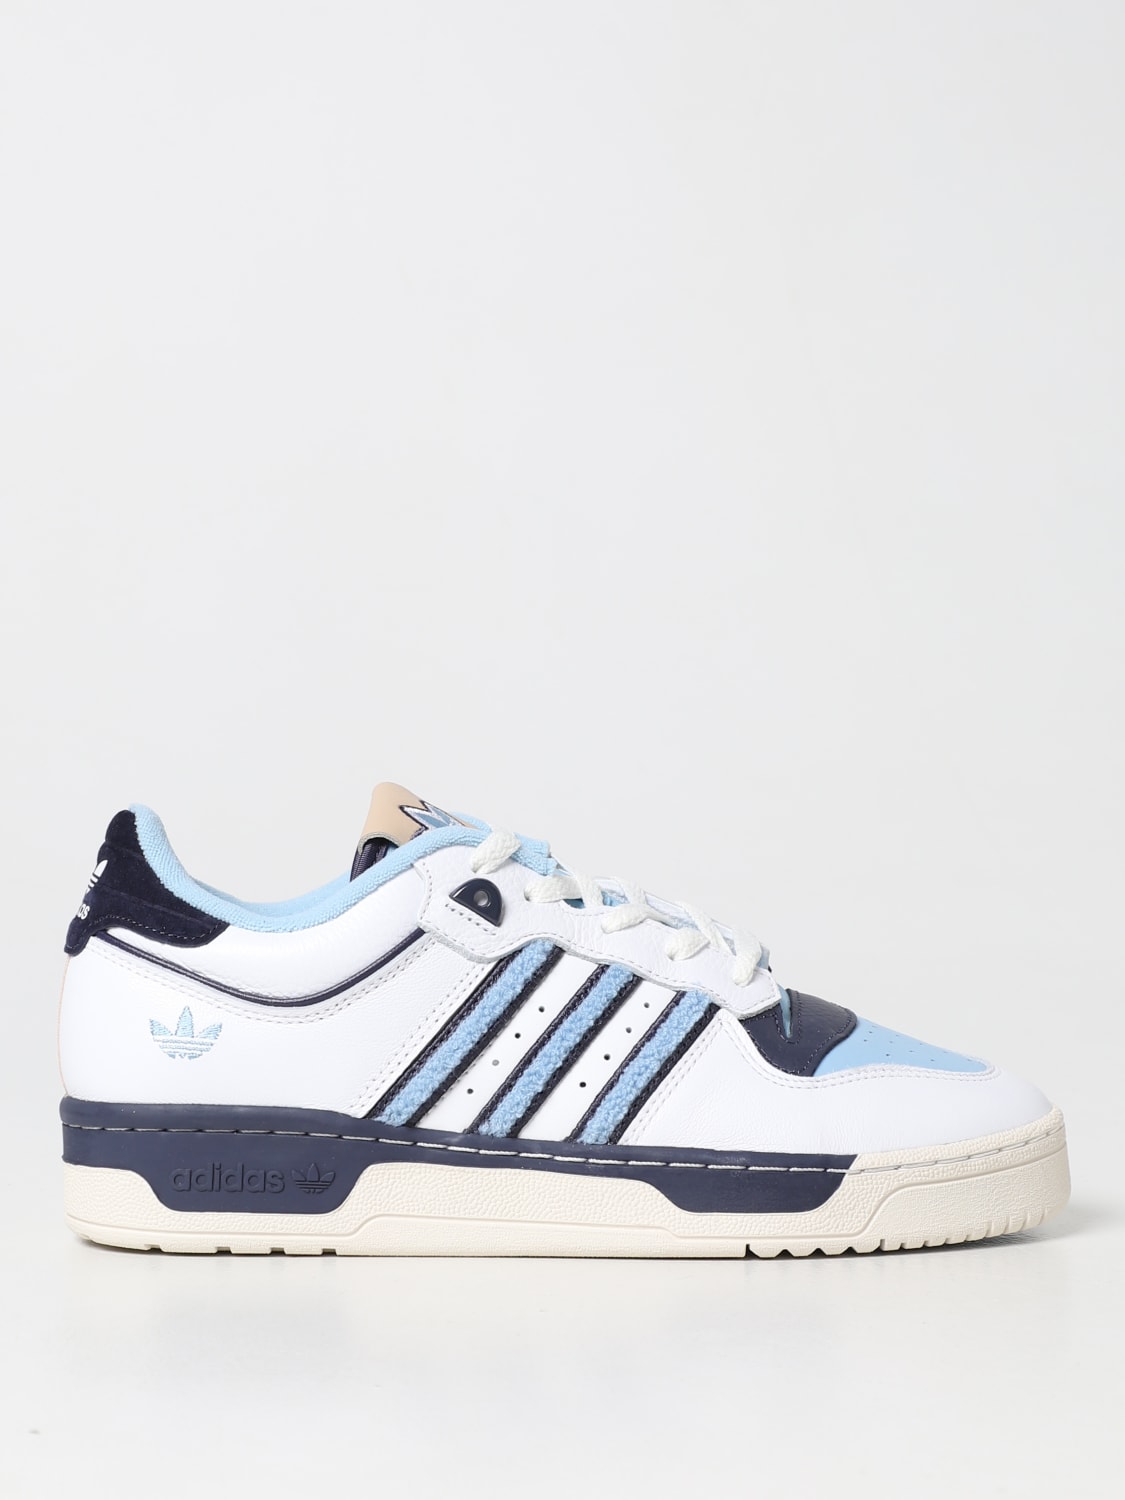 Adidas Originals Outlet: sneakers for man - White  Adidas Originals  sneakers FZ6334 online at